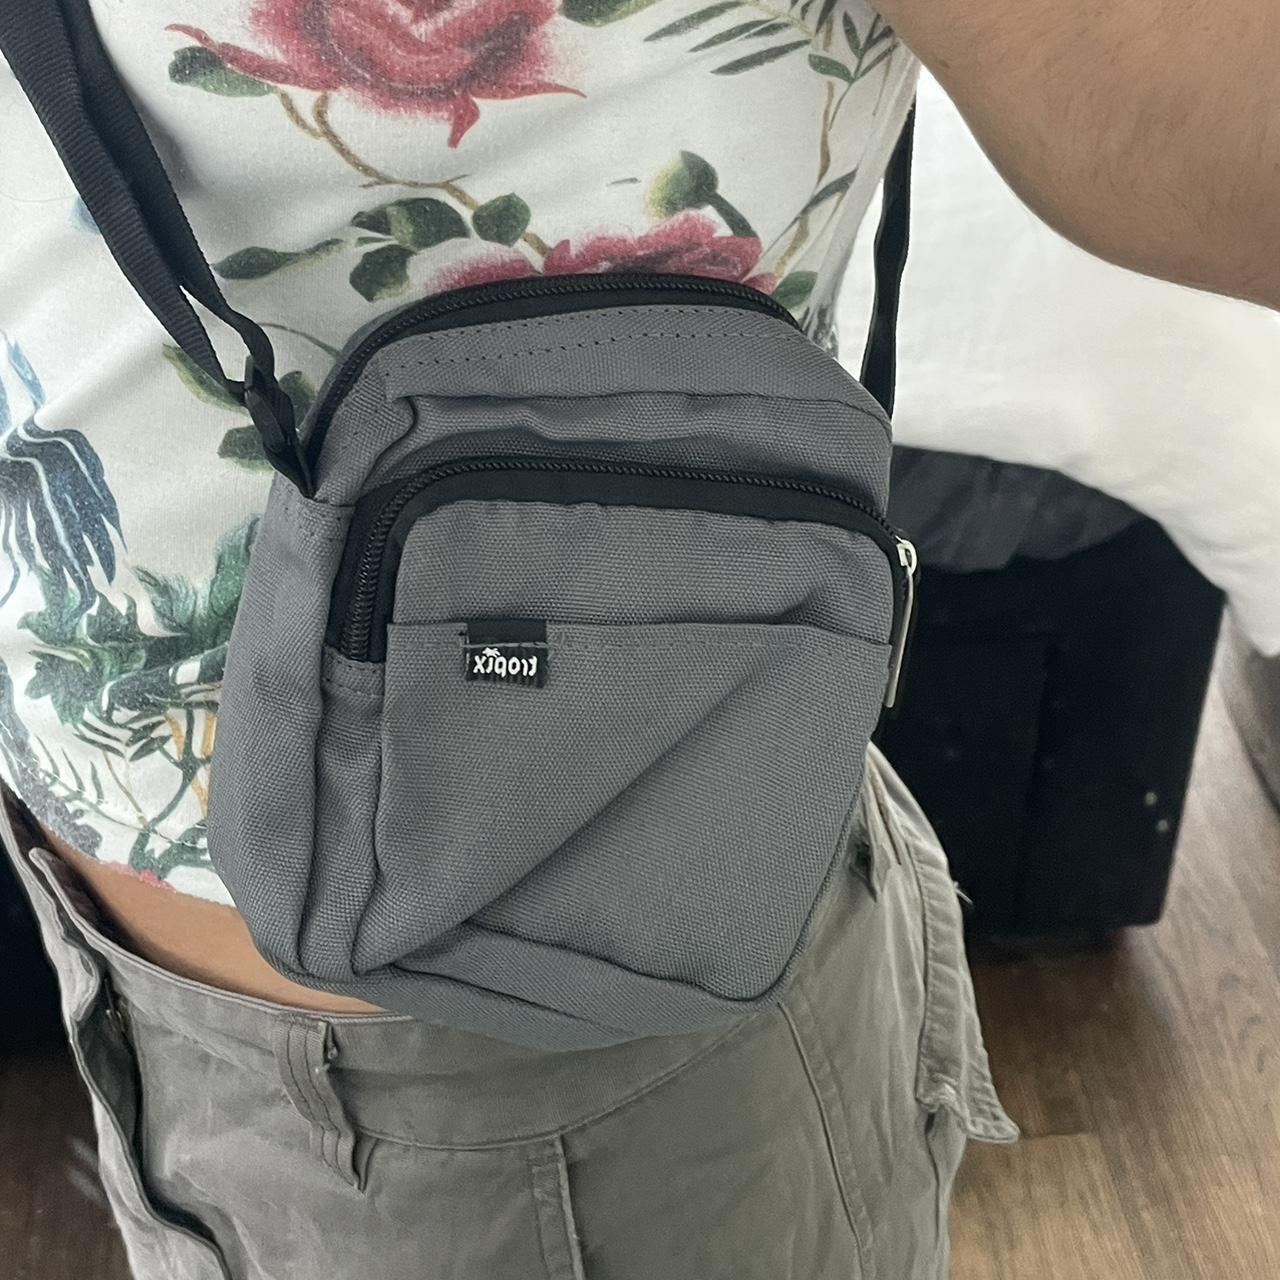 compact side bag - surprisingly fits more than u think - Depop